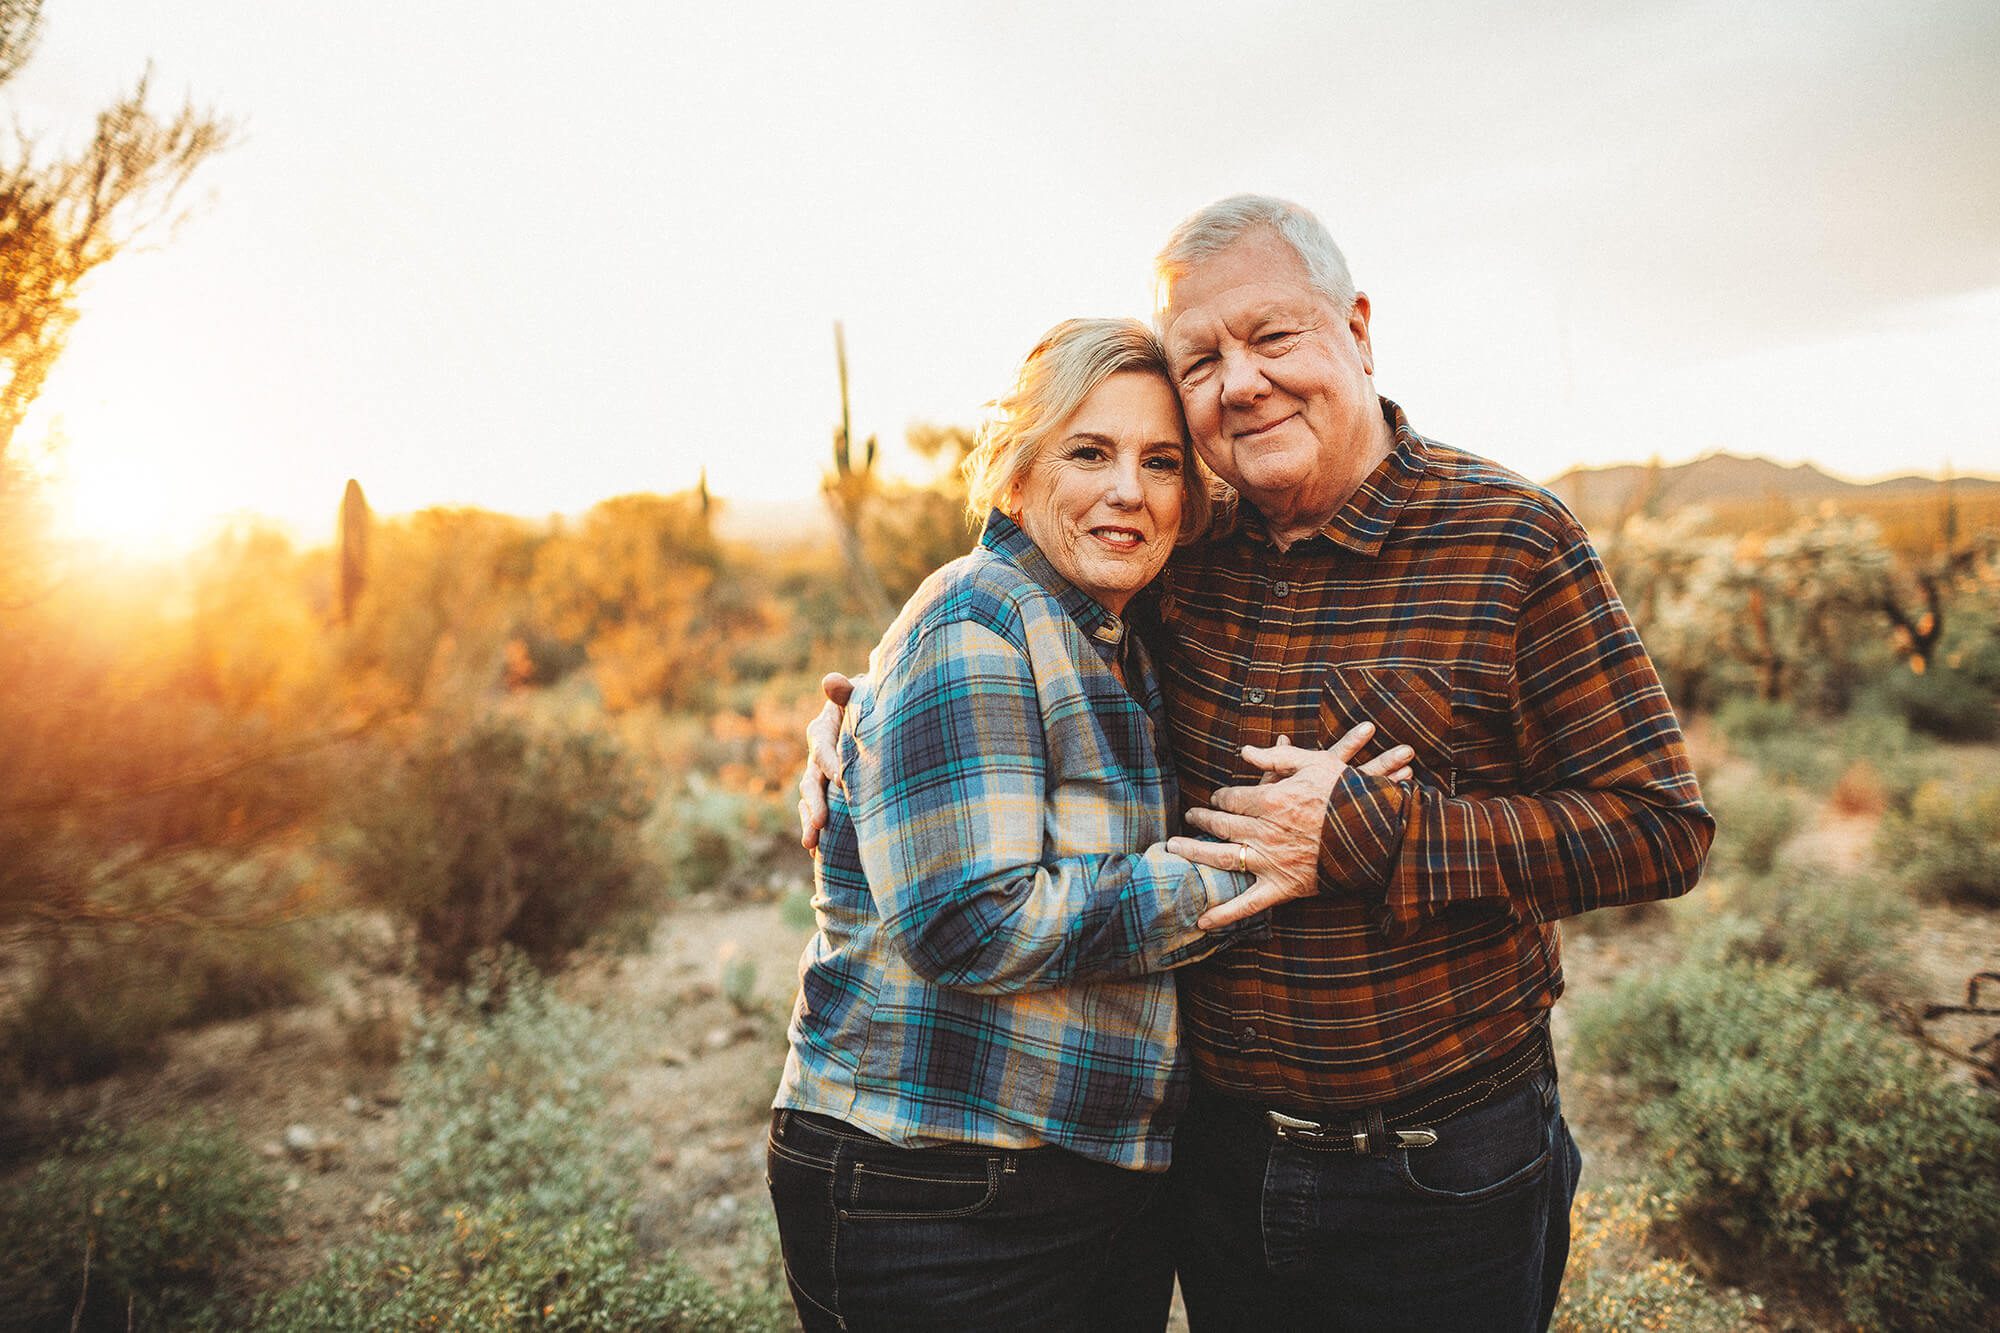 Mom & Dad snuggle together happily after many years of marriage, lovingly holding each other during the Lindley family photo session in Tucson